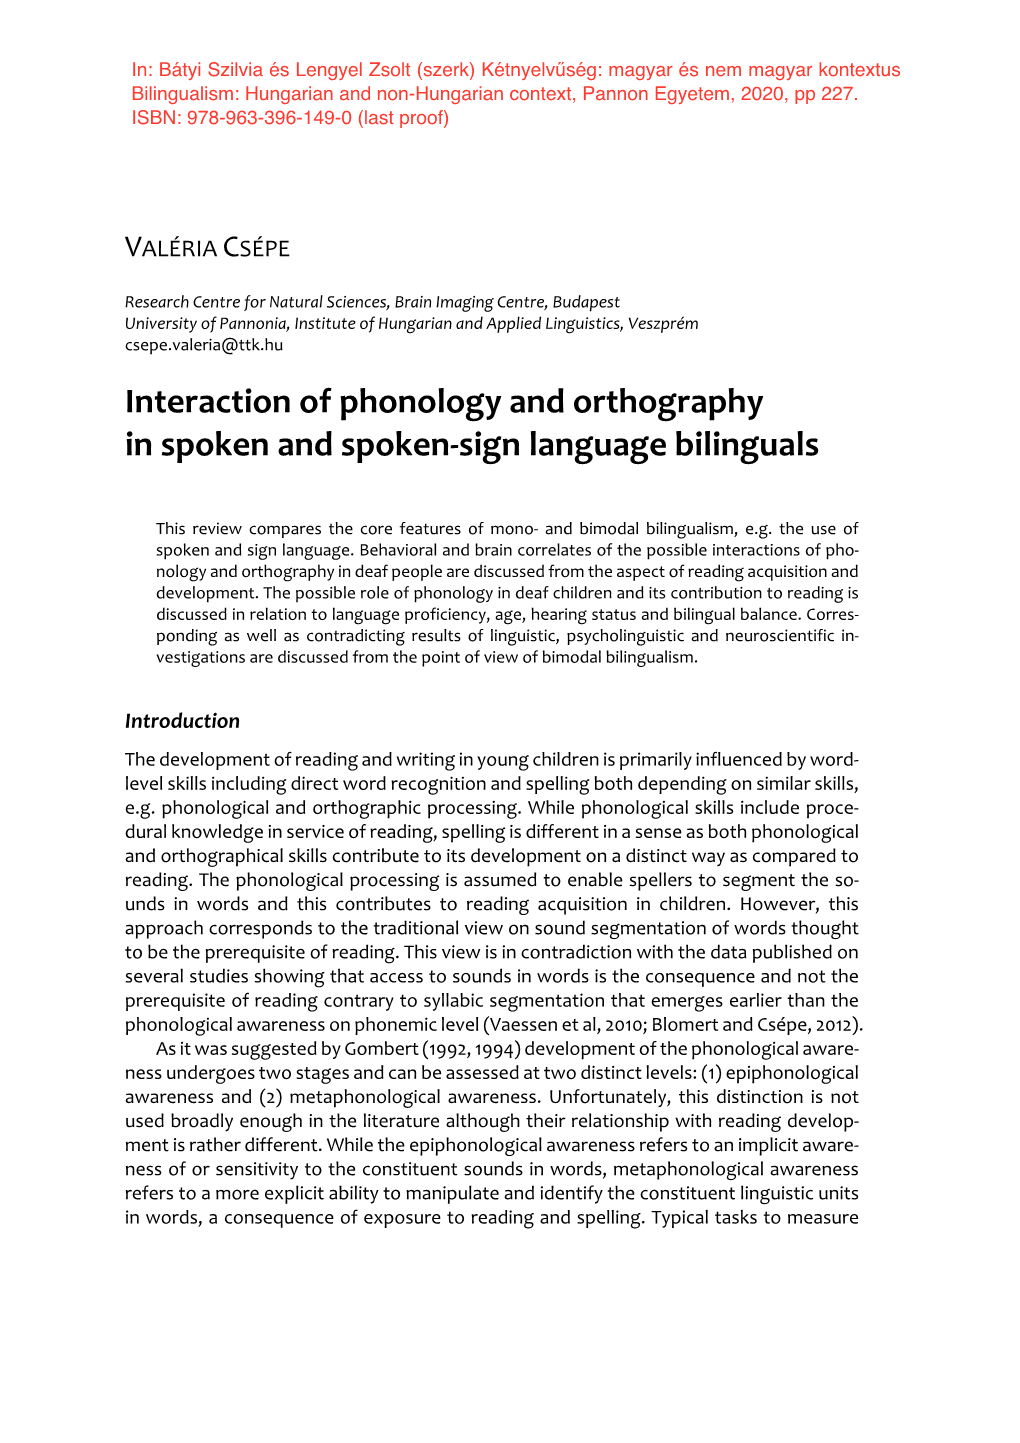 Interaction of Phonology and Orthography in Spoken and Spoken‐Sign Language Bilinguals